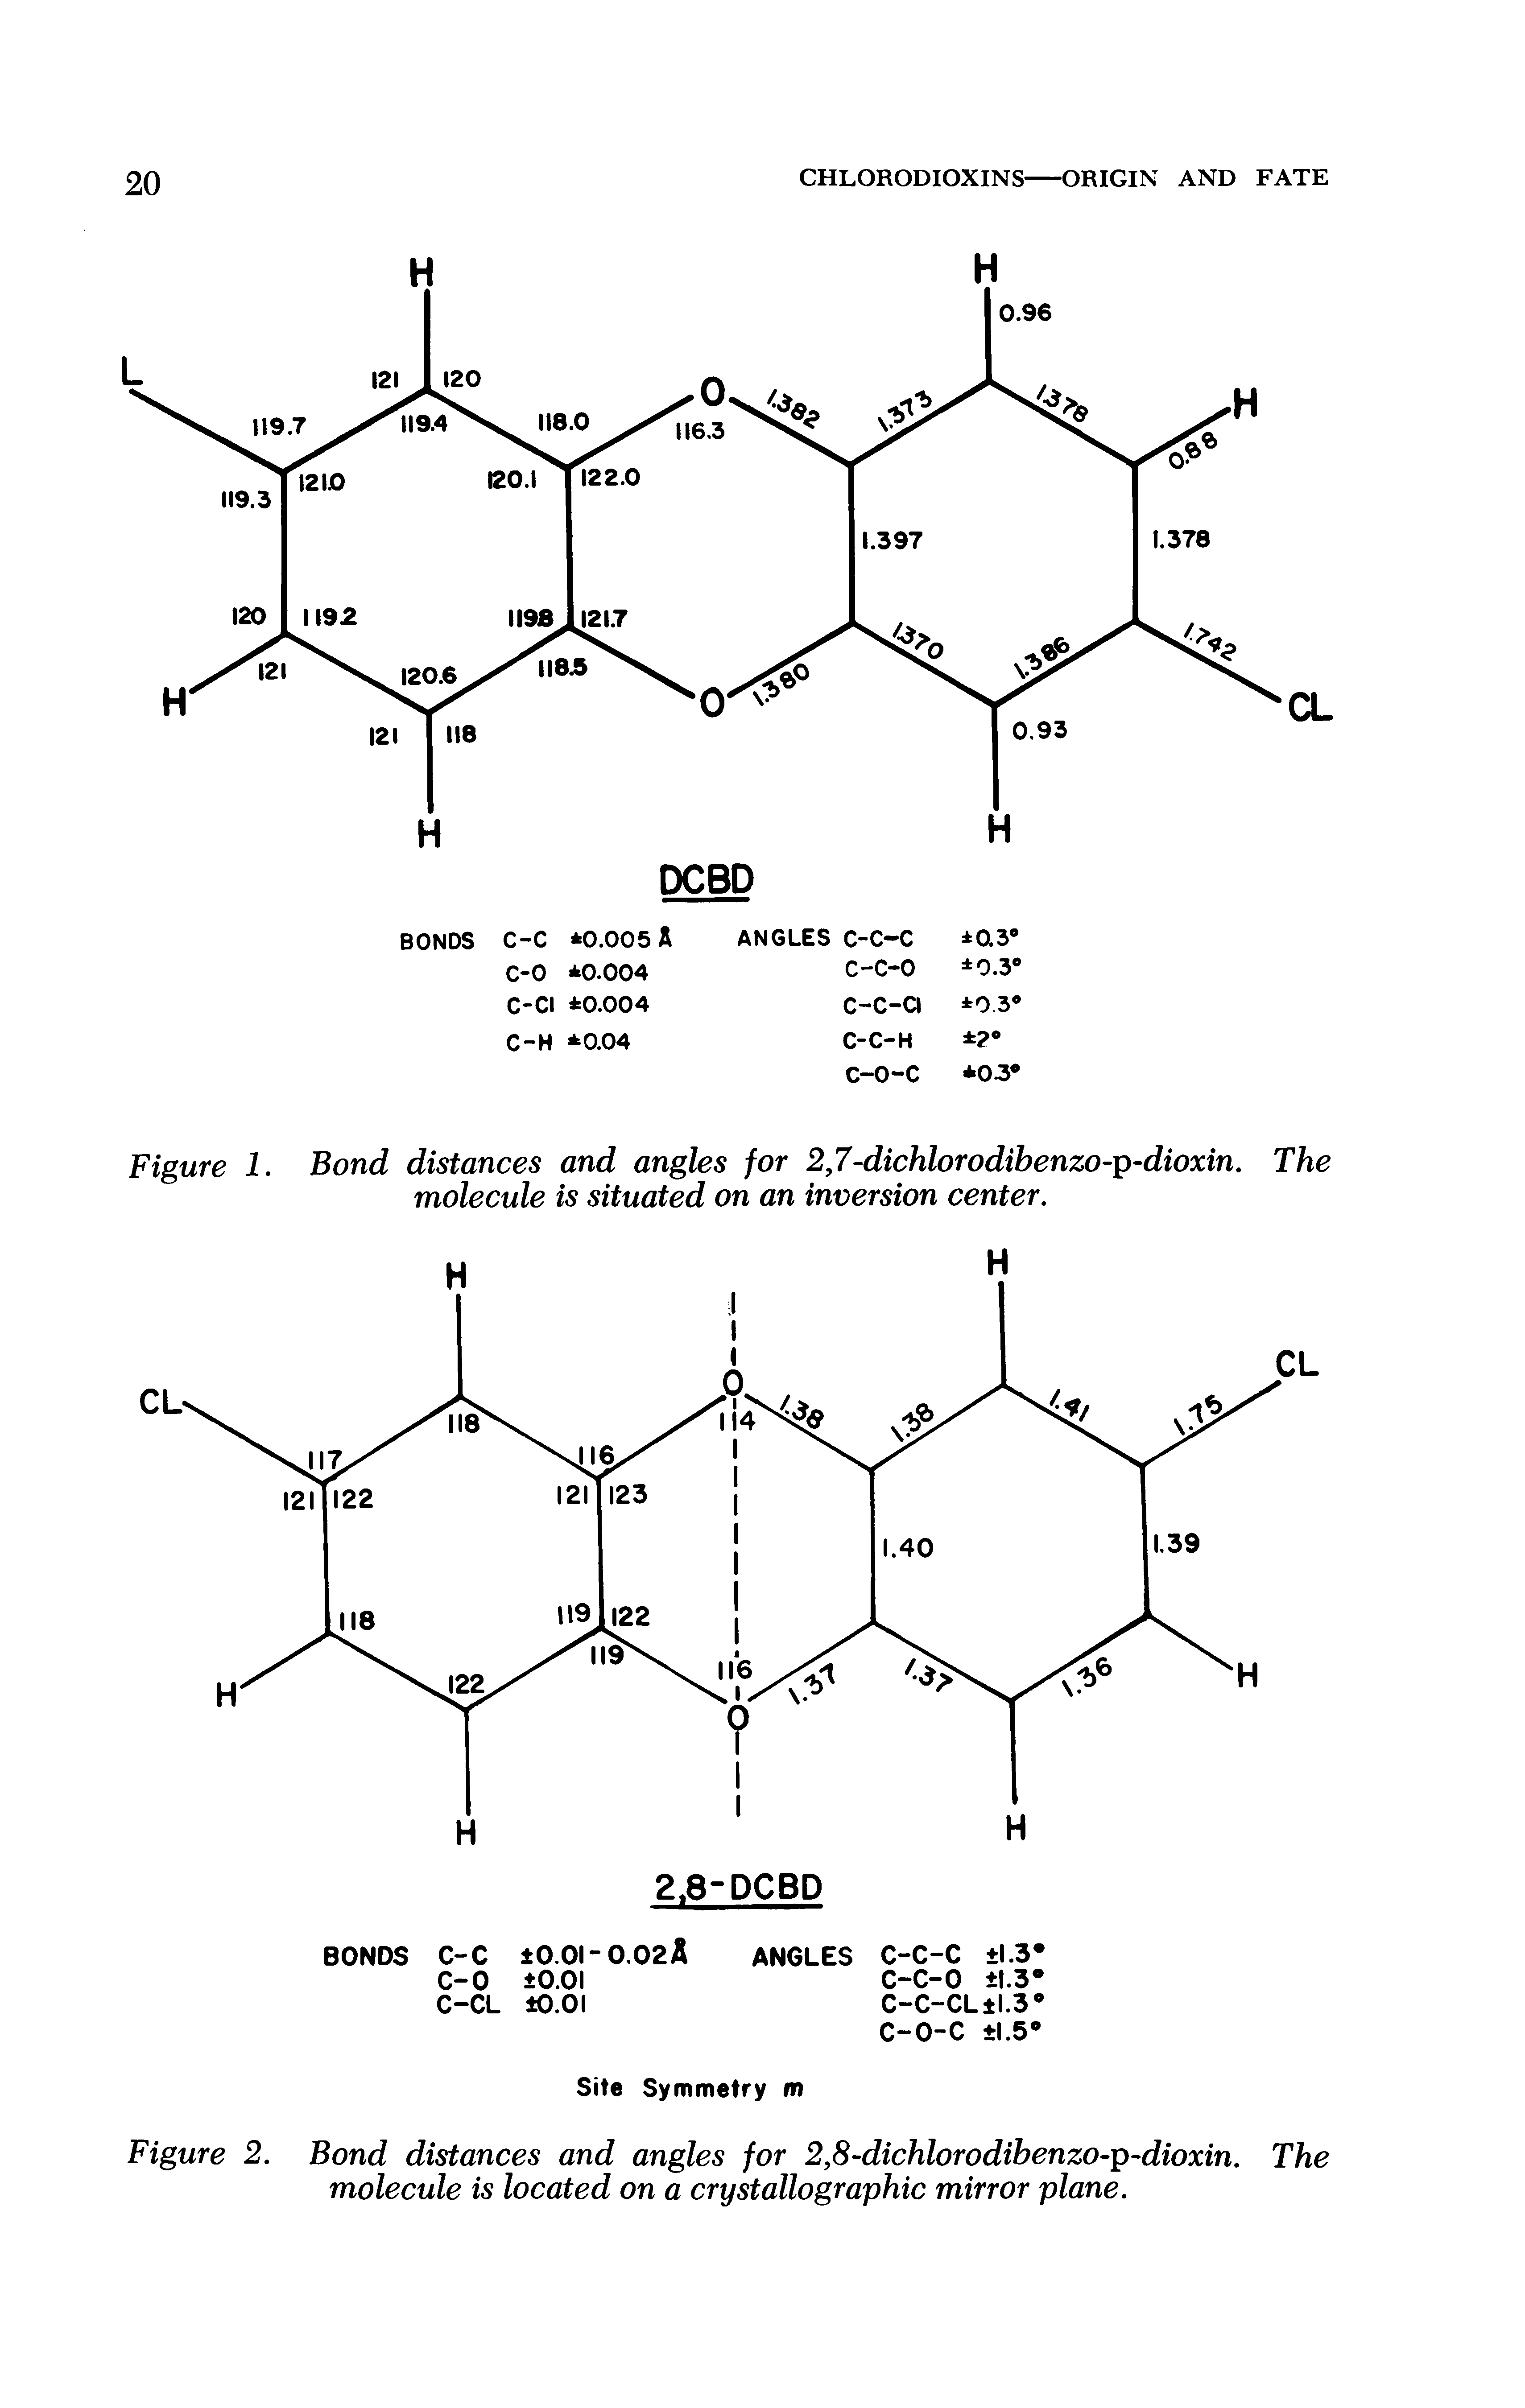 Figure 2. Bond distances and angles for 2,8-dichlorodihenzo- -dioxin. The molecule is located on a crystallographic mirror plane.